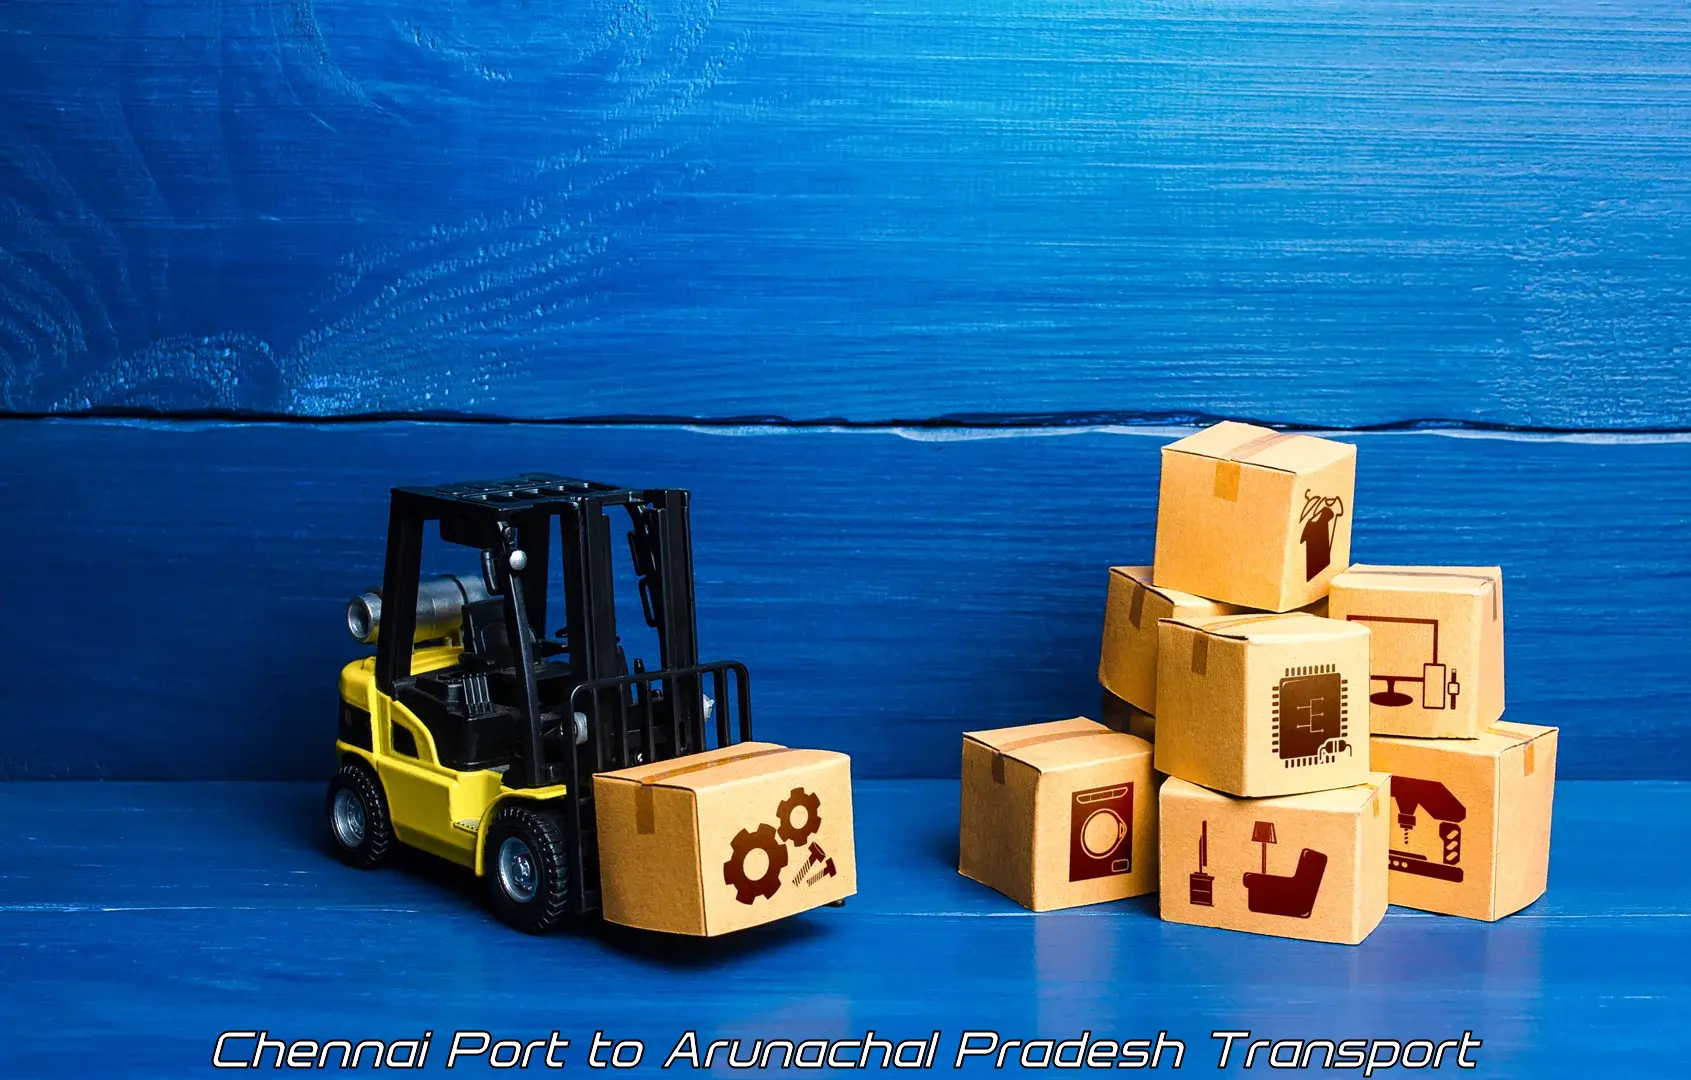 Furniture transport service in Chennai Port to Papum Pare